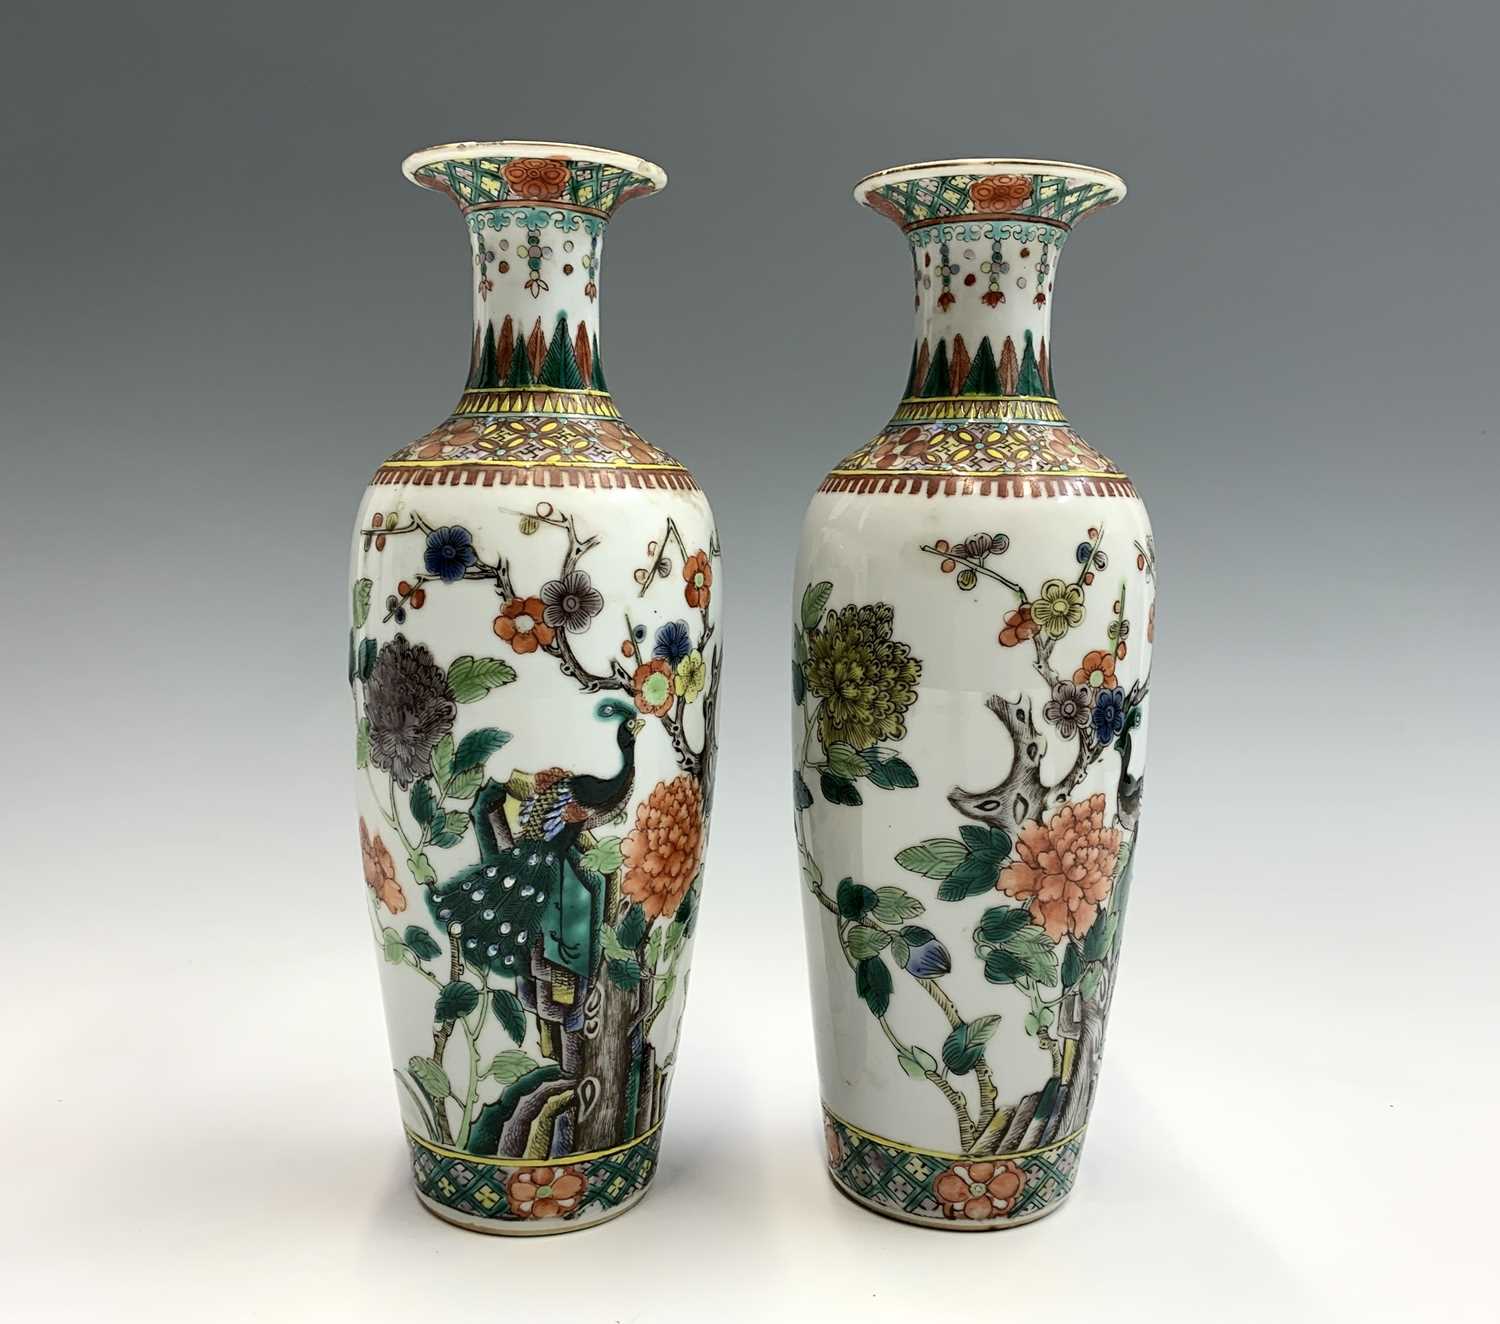 A pair of Chinese famille verte porcelain vases, Qianlong four character mark, with an exotic bird